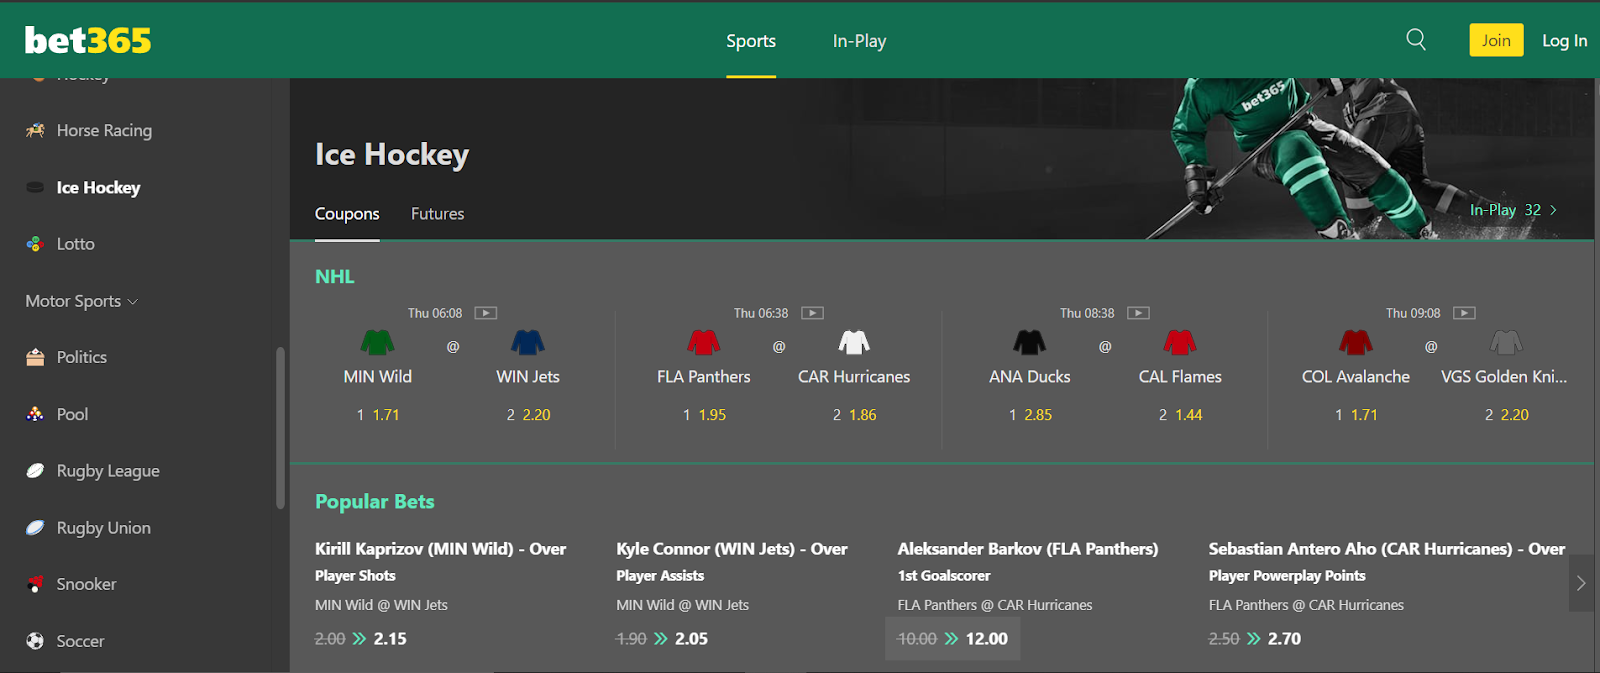 bet365 offering details on ice hockey games and betting options.